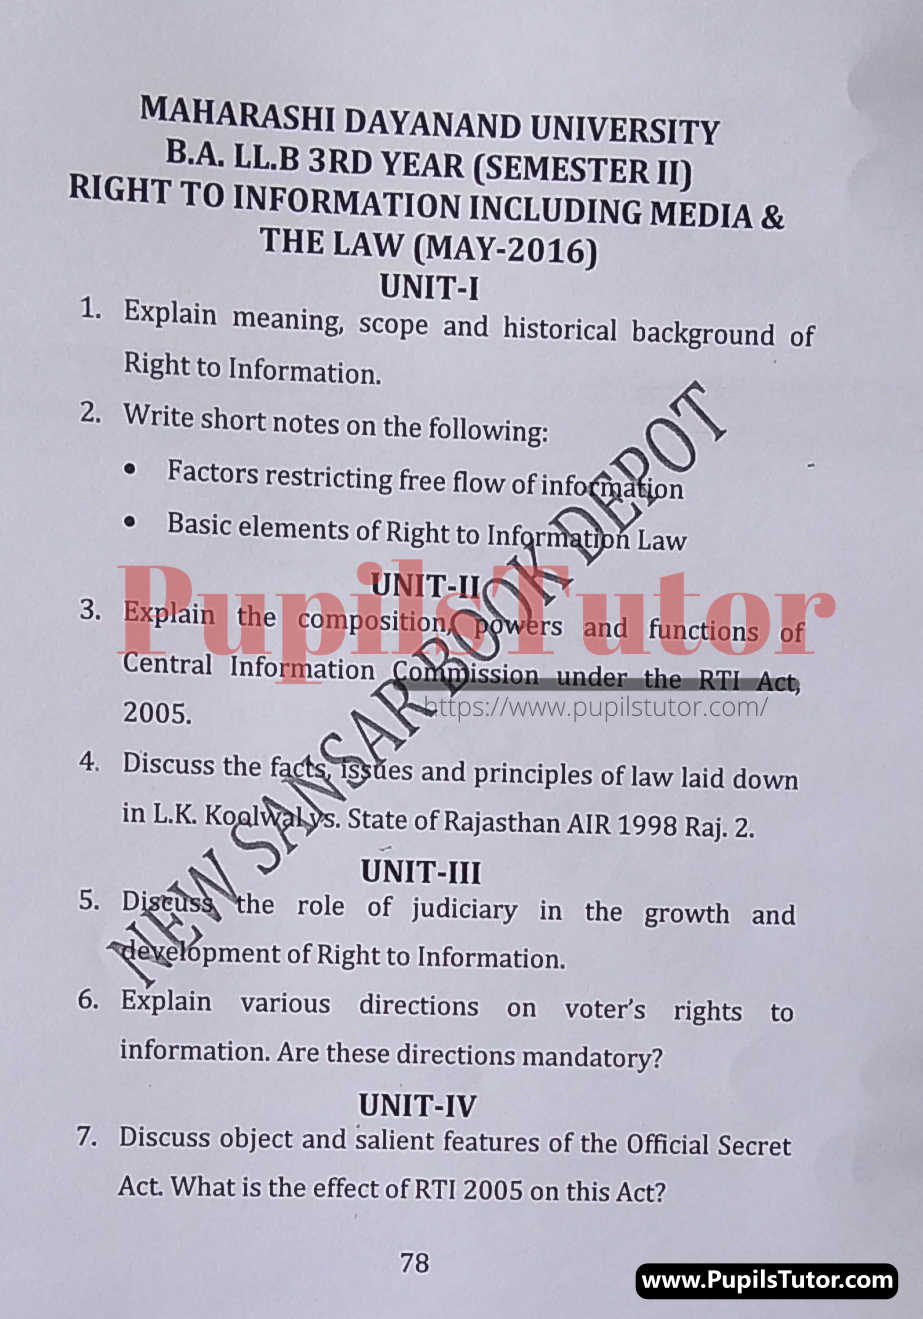 MDU (Maharshi Dayanand University, Rohtak Haryana) LLB Regular Exam (Hons.) Second Semester Previous Year Right To Information Including Media And The Law Question Paper For May, 2016 Exam (Question Paper Page 1) - pupilstutor.com